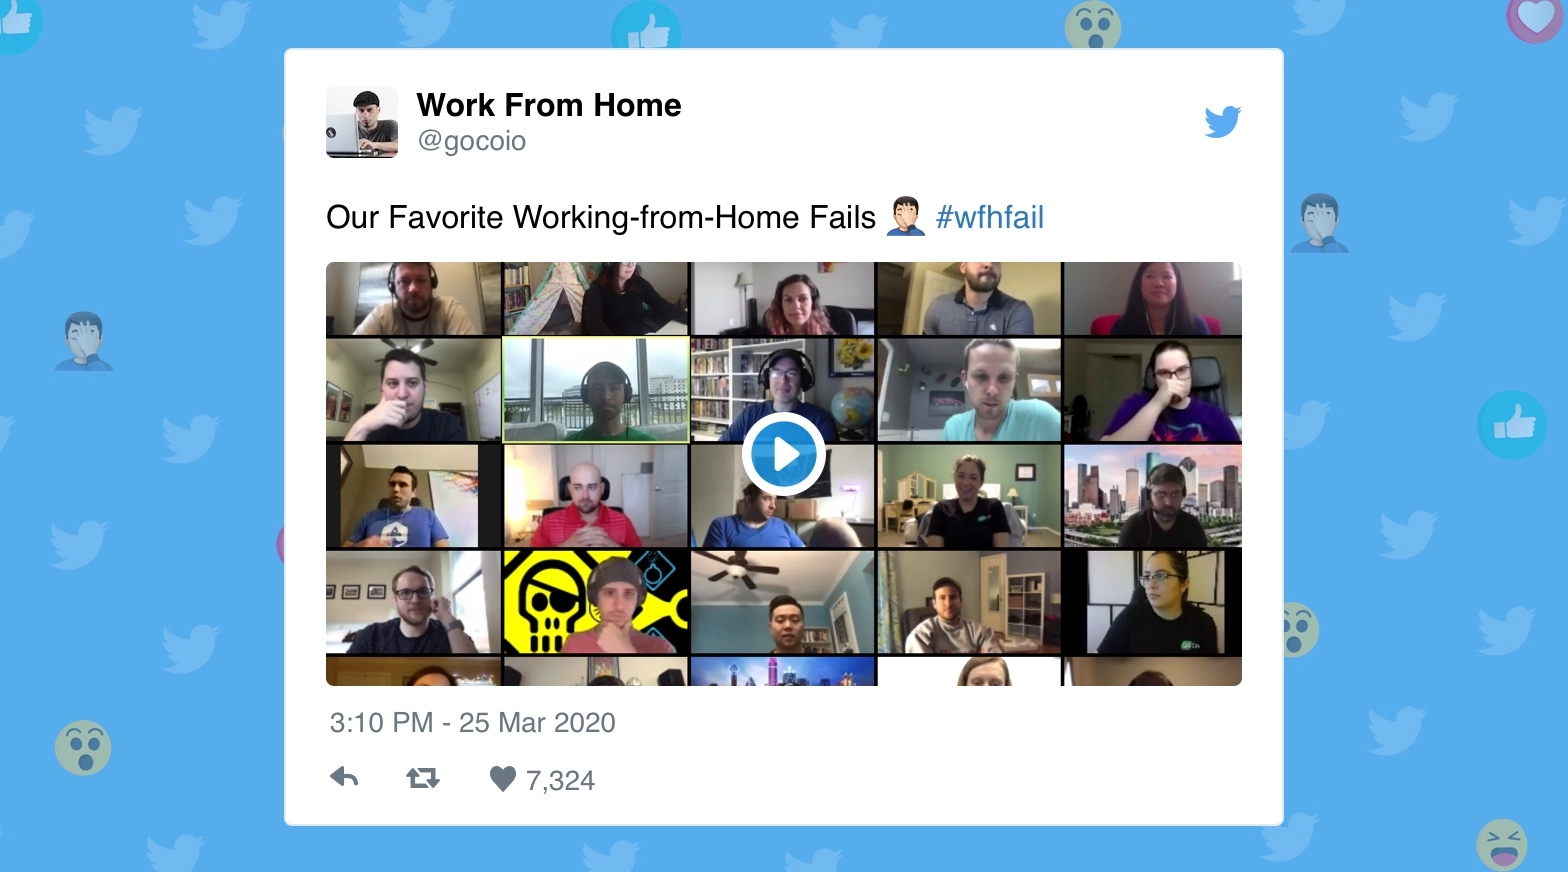 Our Favorite Working-from-Home Fails to Brighten Your Day